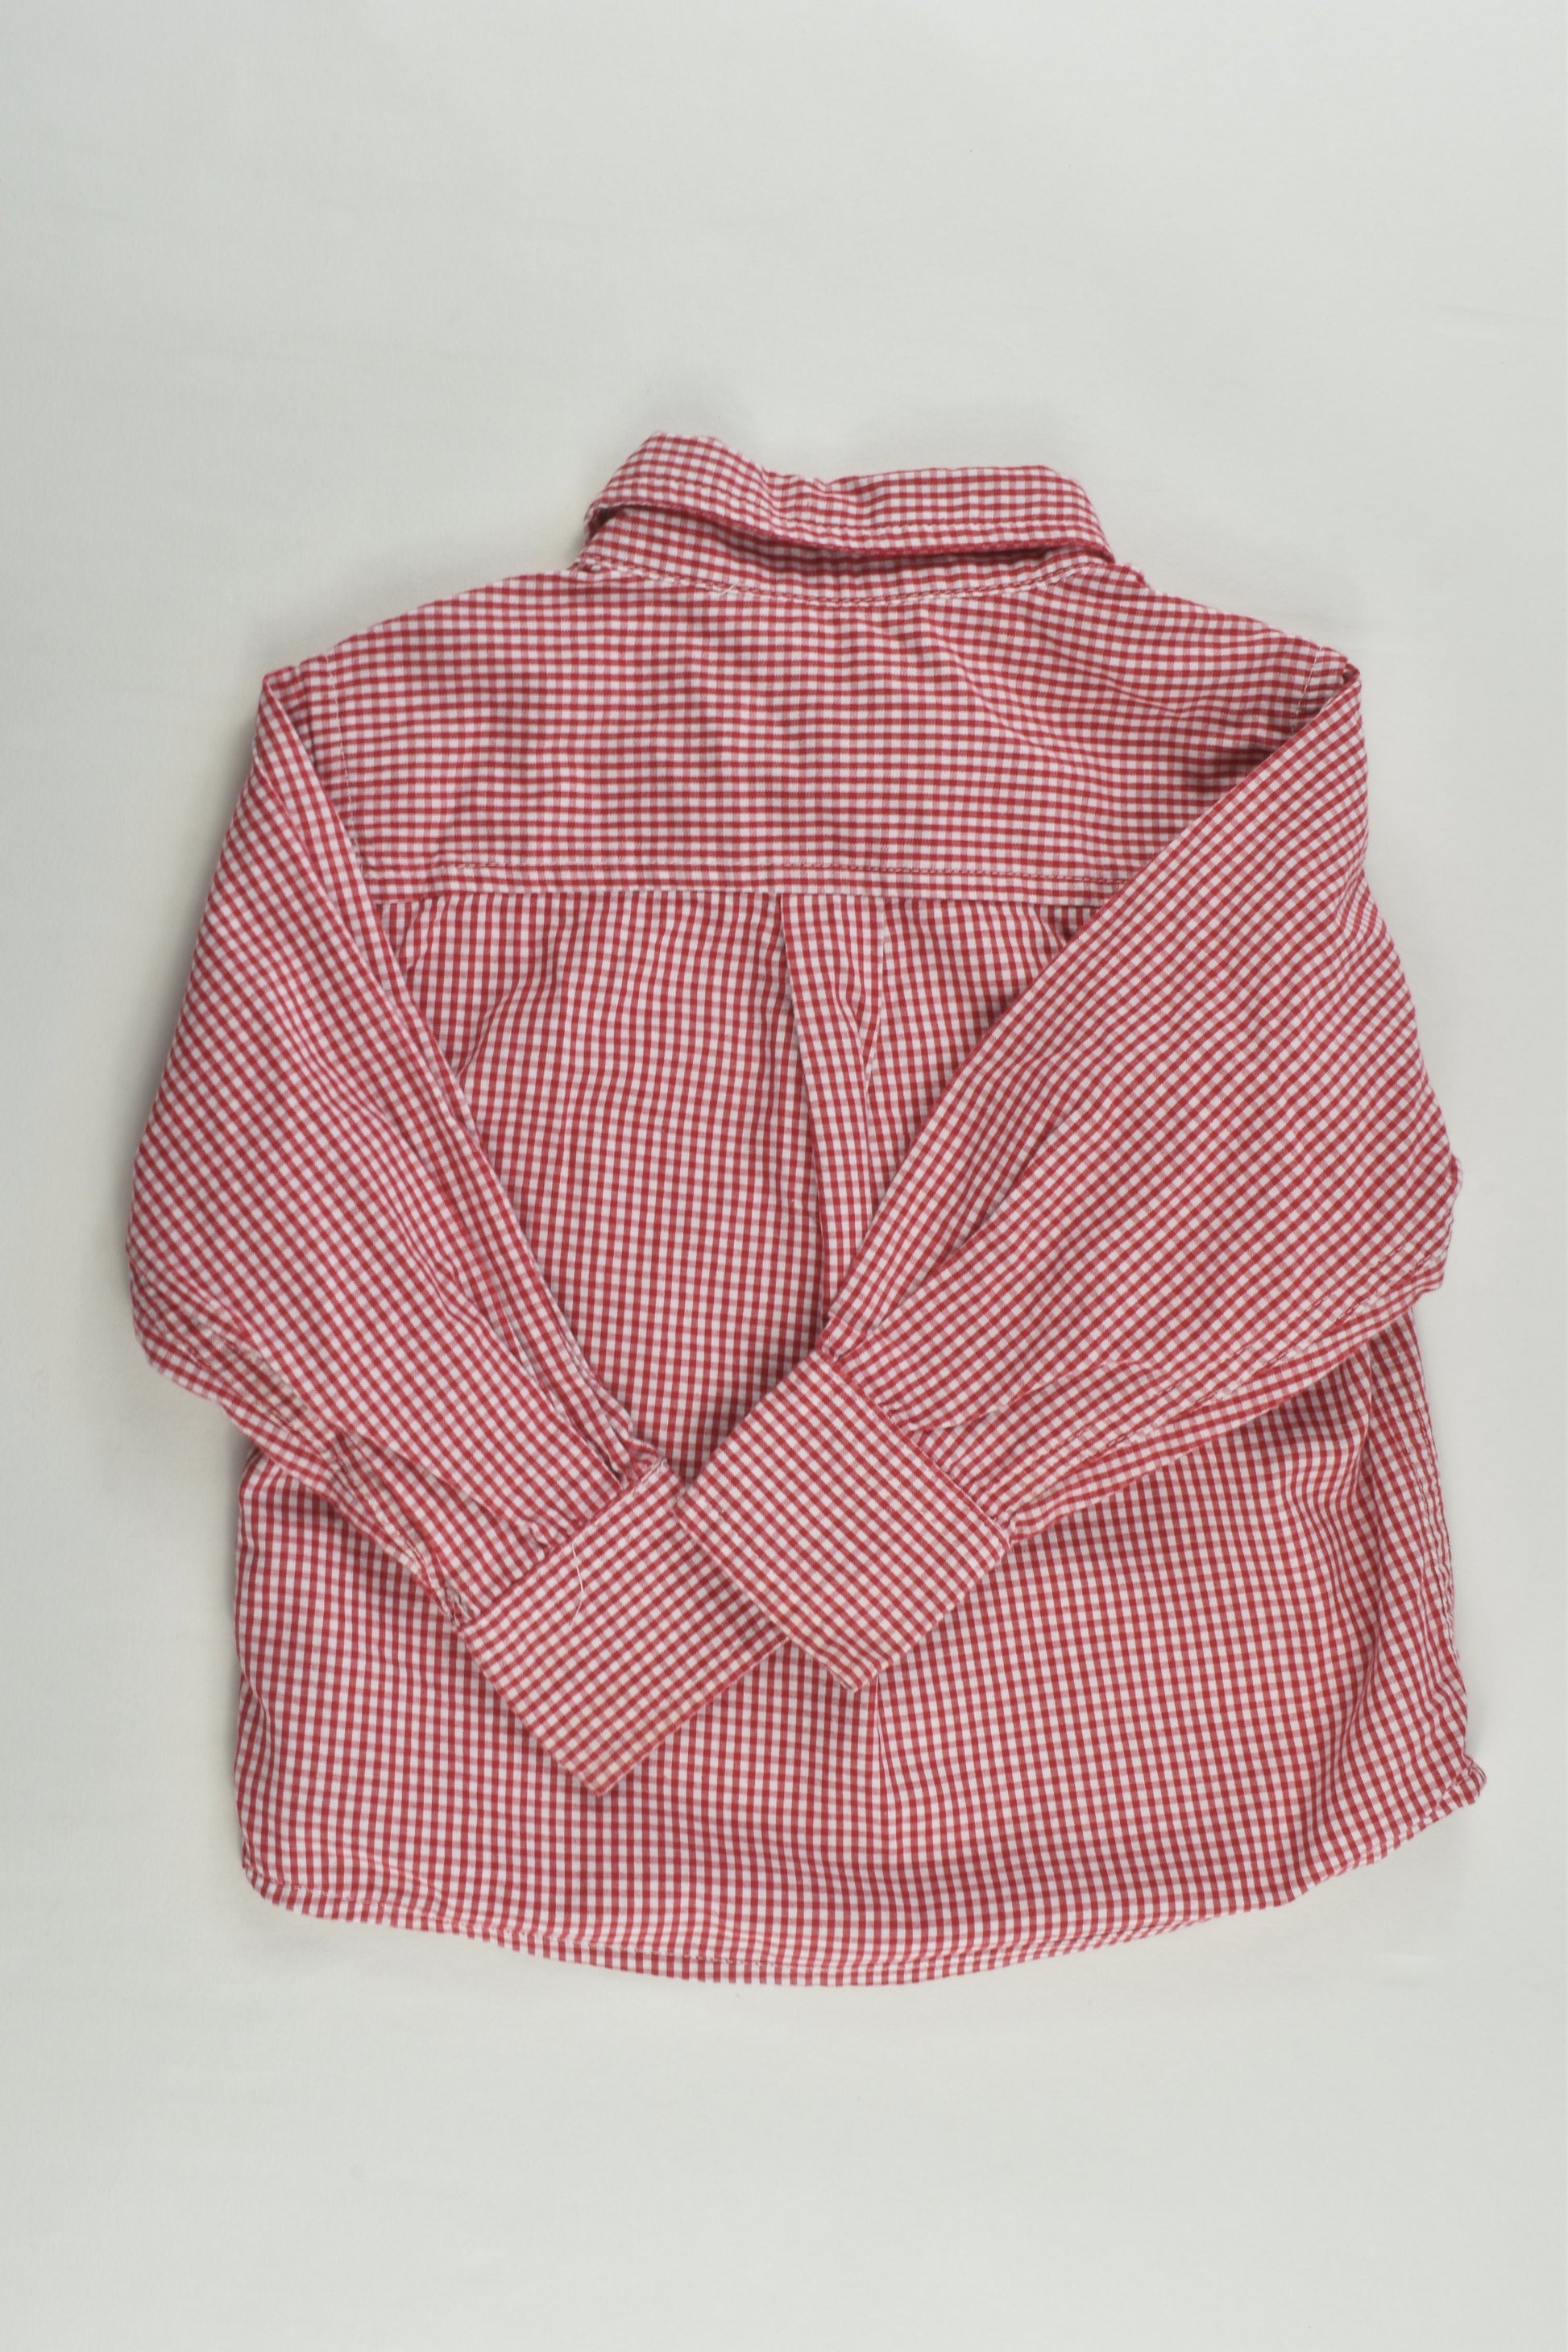 Early Days Size 0 (6-12 months) Checked Shirt